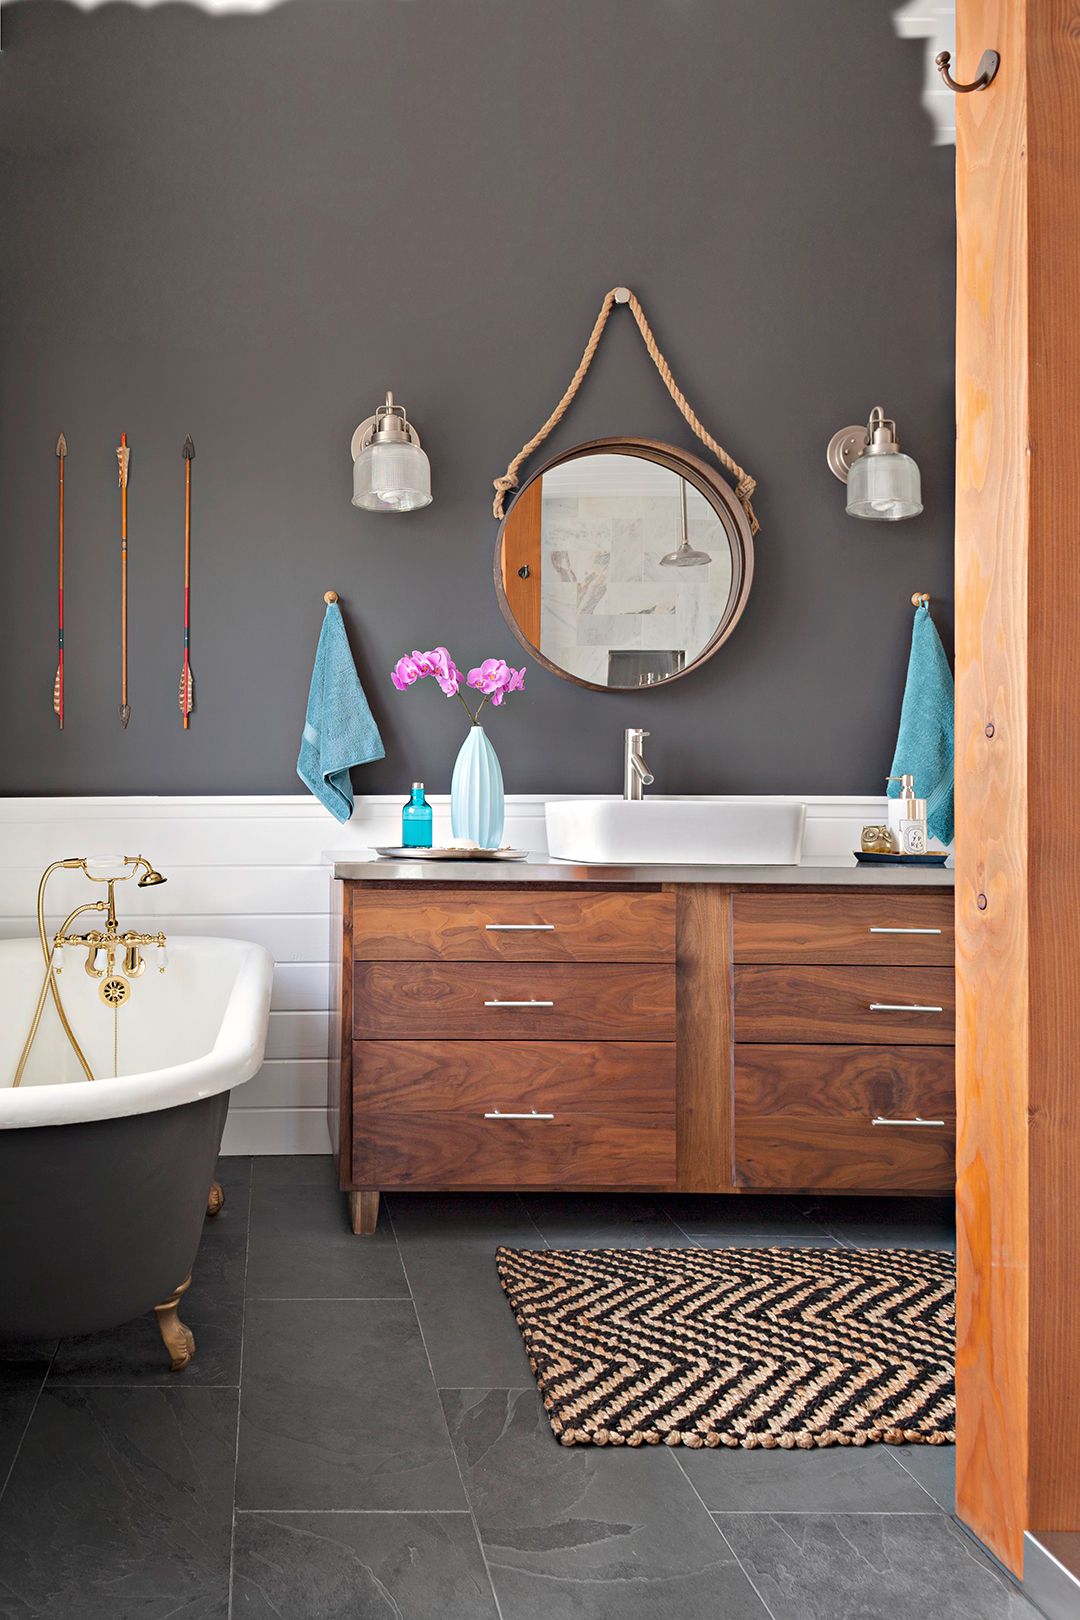 Small bathroom accent wall may present design challenges, they also offer an opportunity to get creative and make a bold statement with an accent wall.